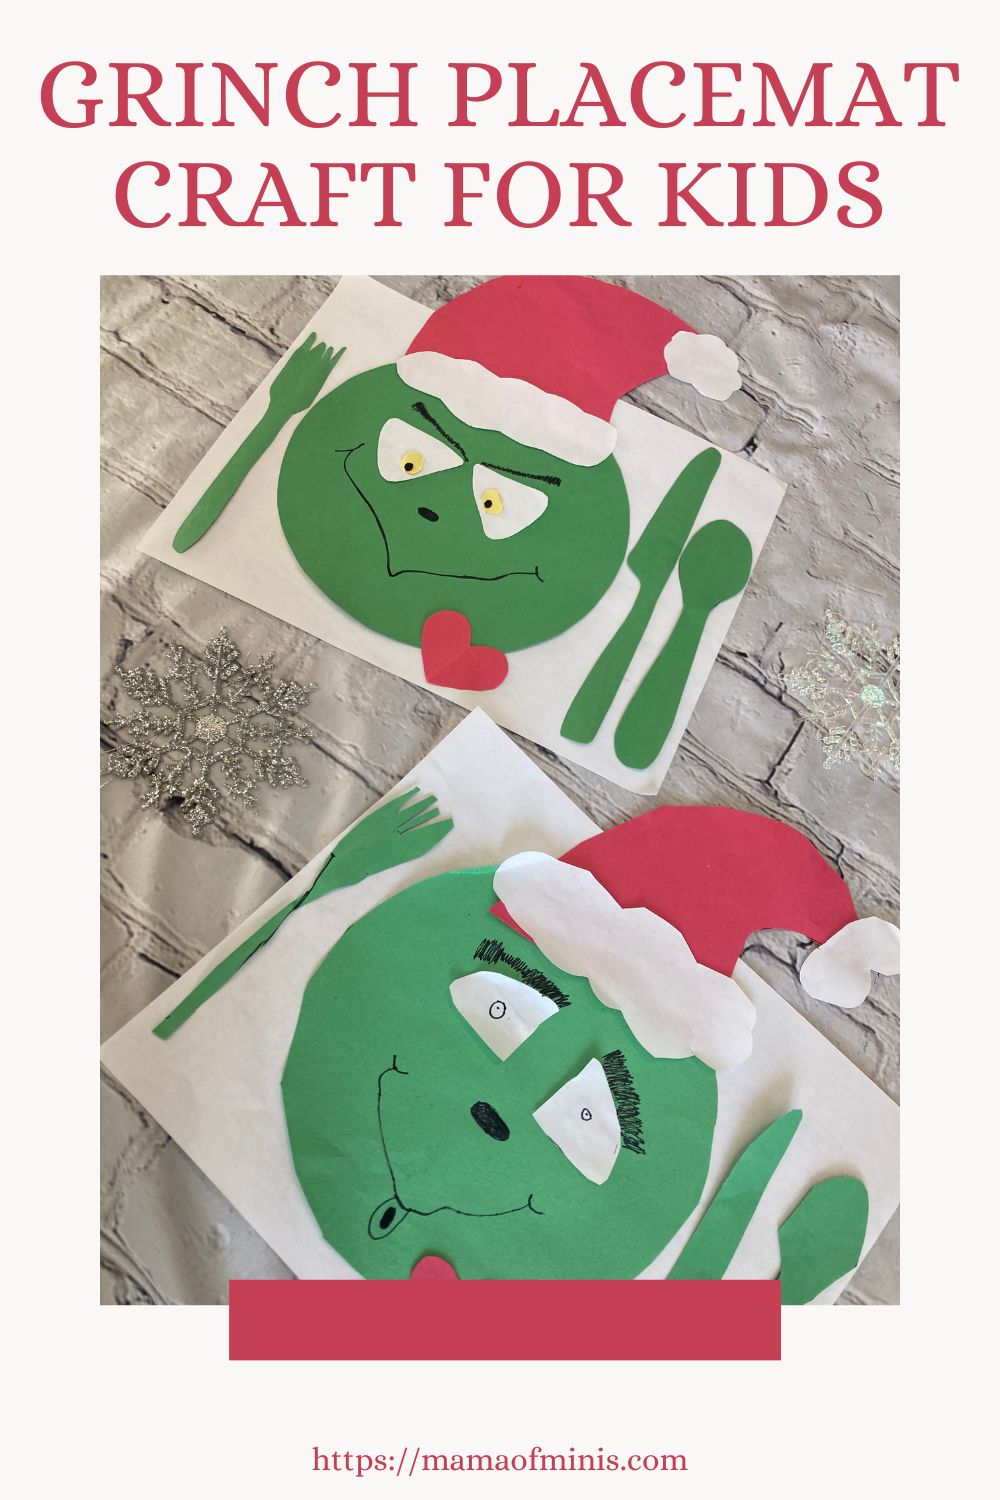 The Grinch Stole Christmas Placemat Craft for Kids Pin